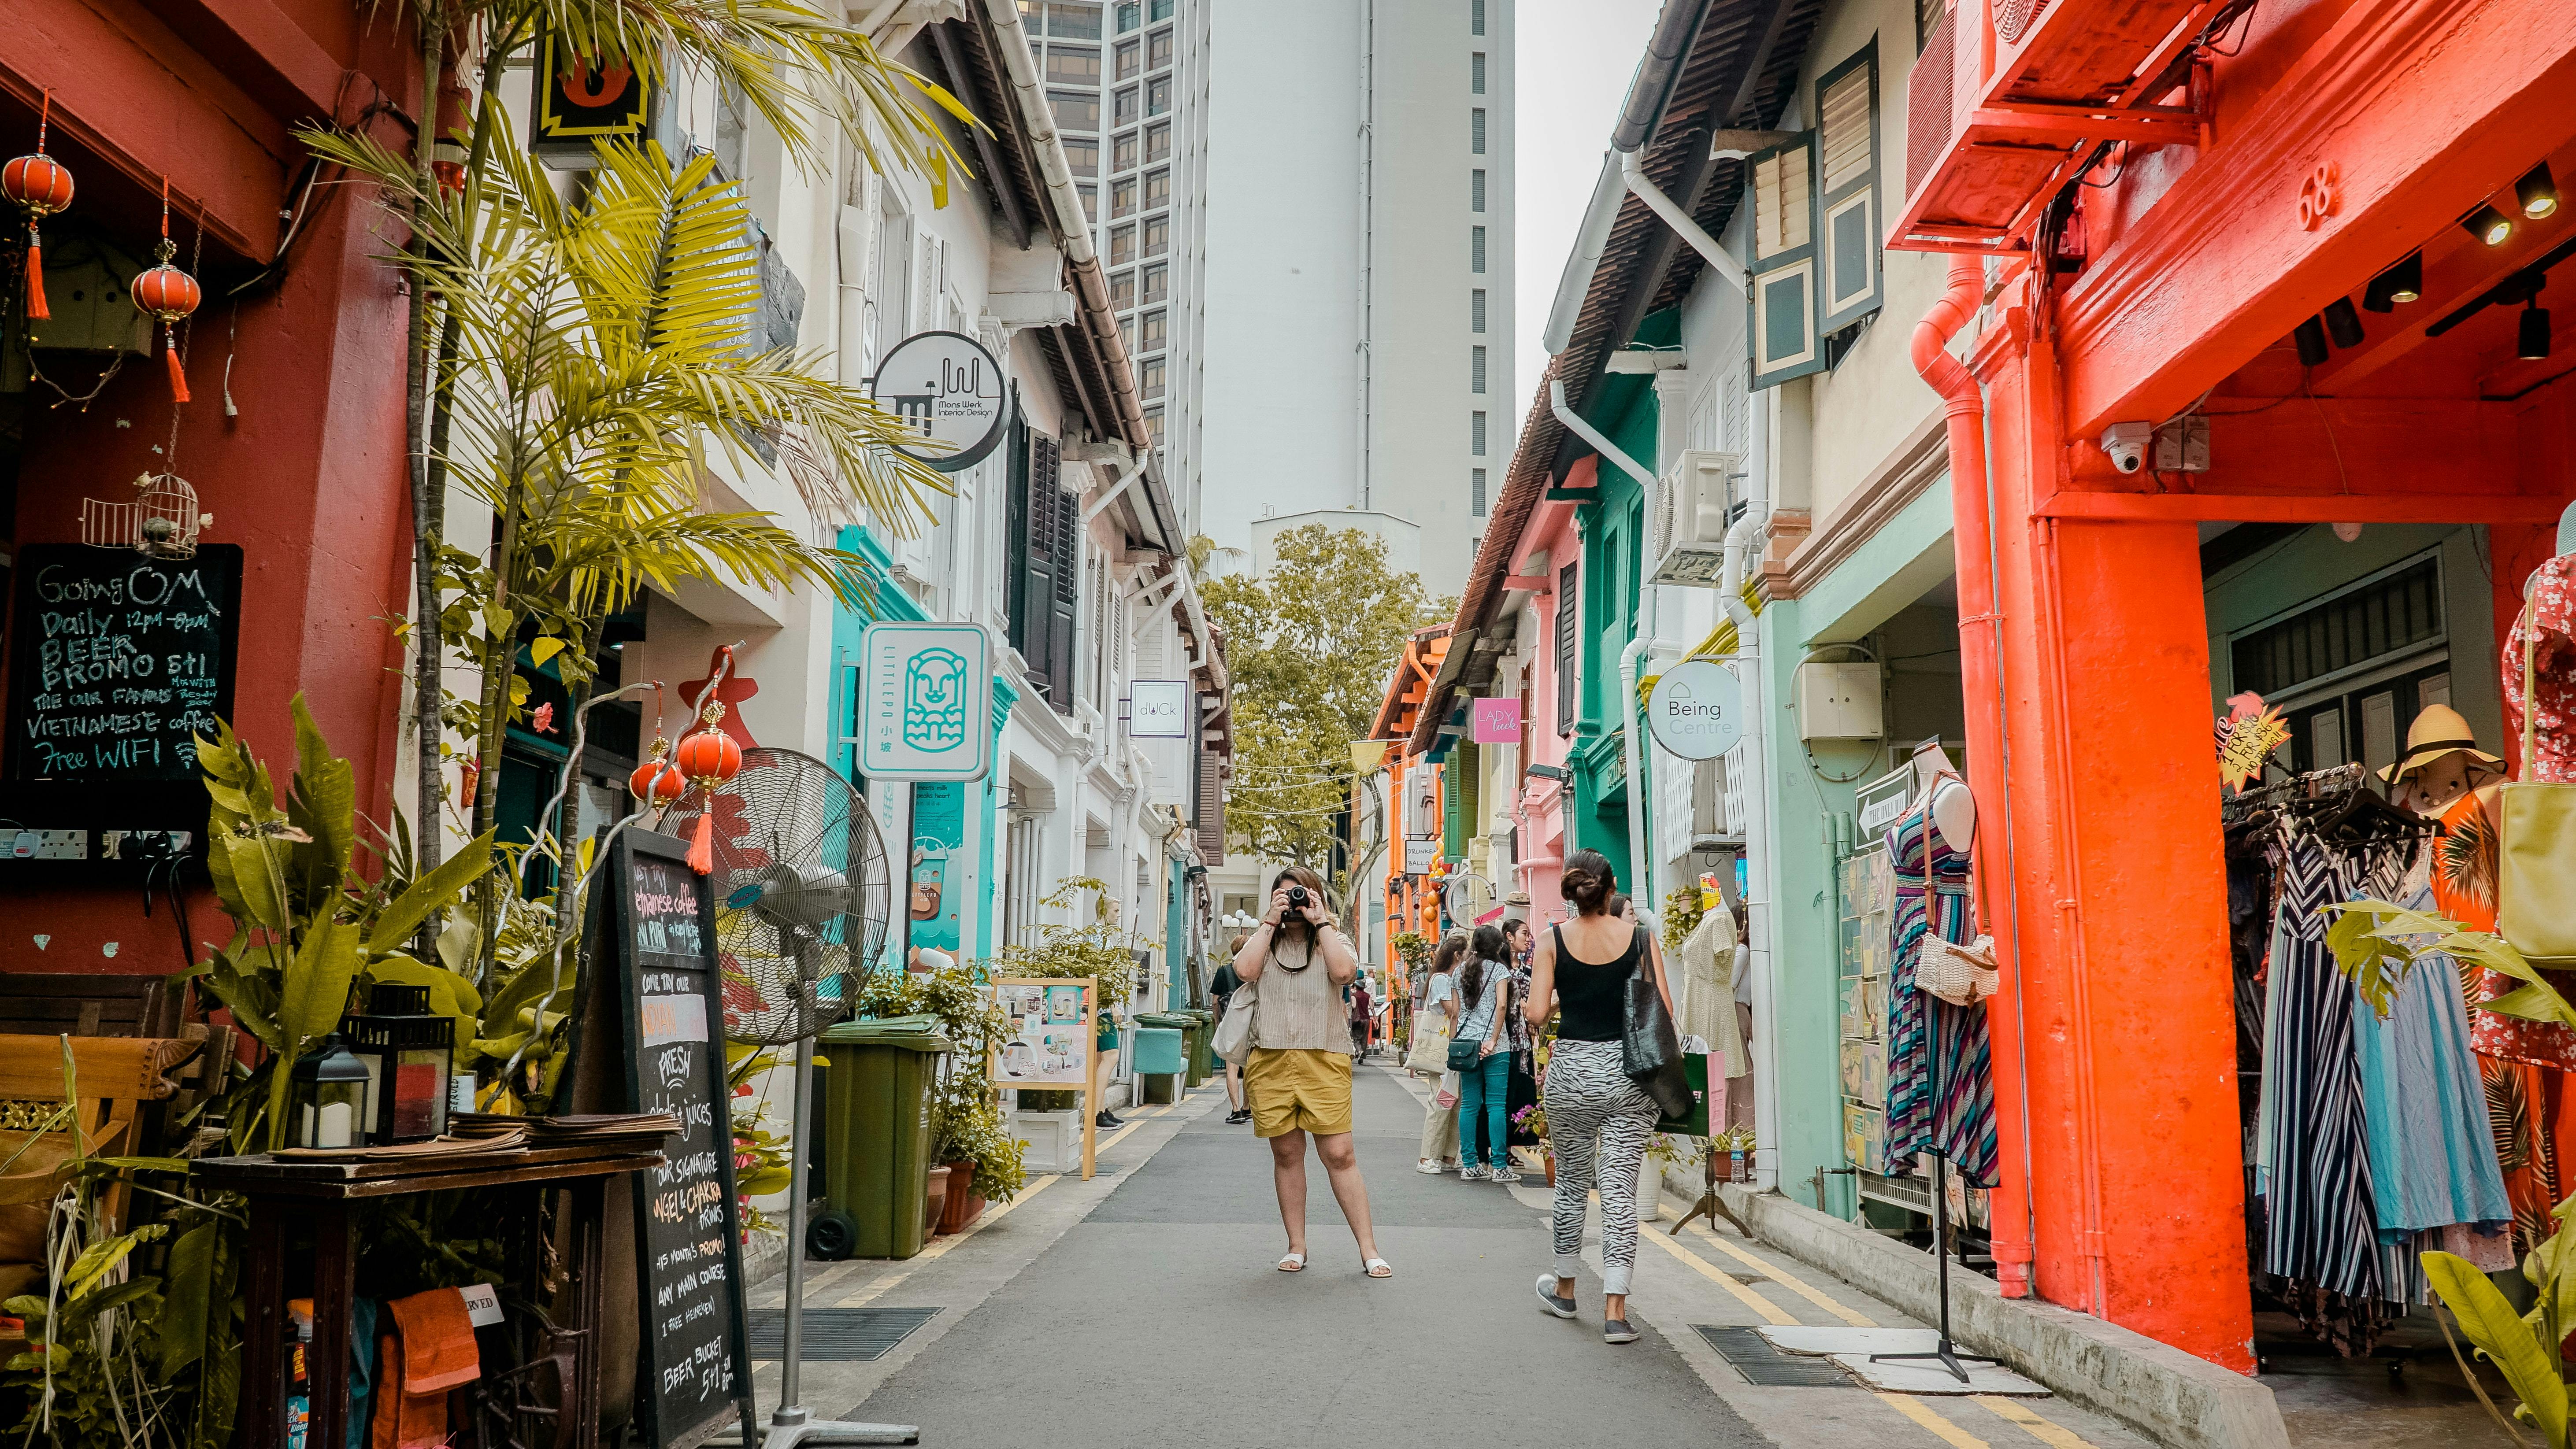 Shopping locations in Singapore